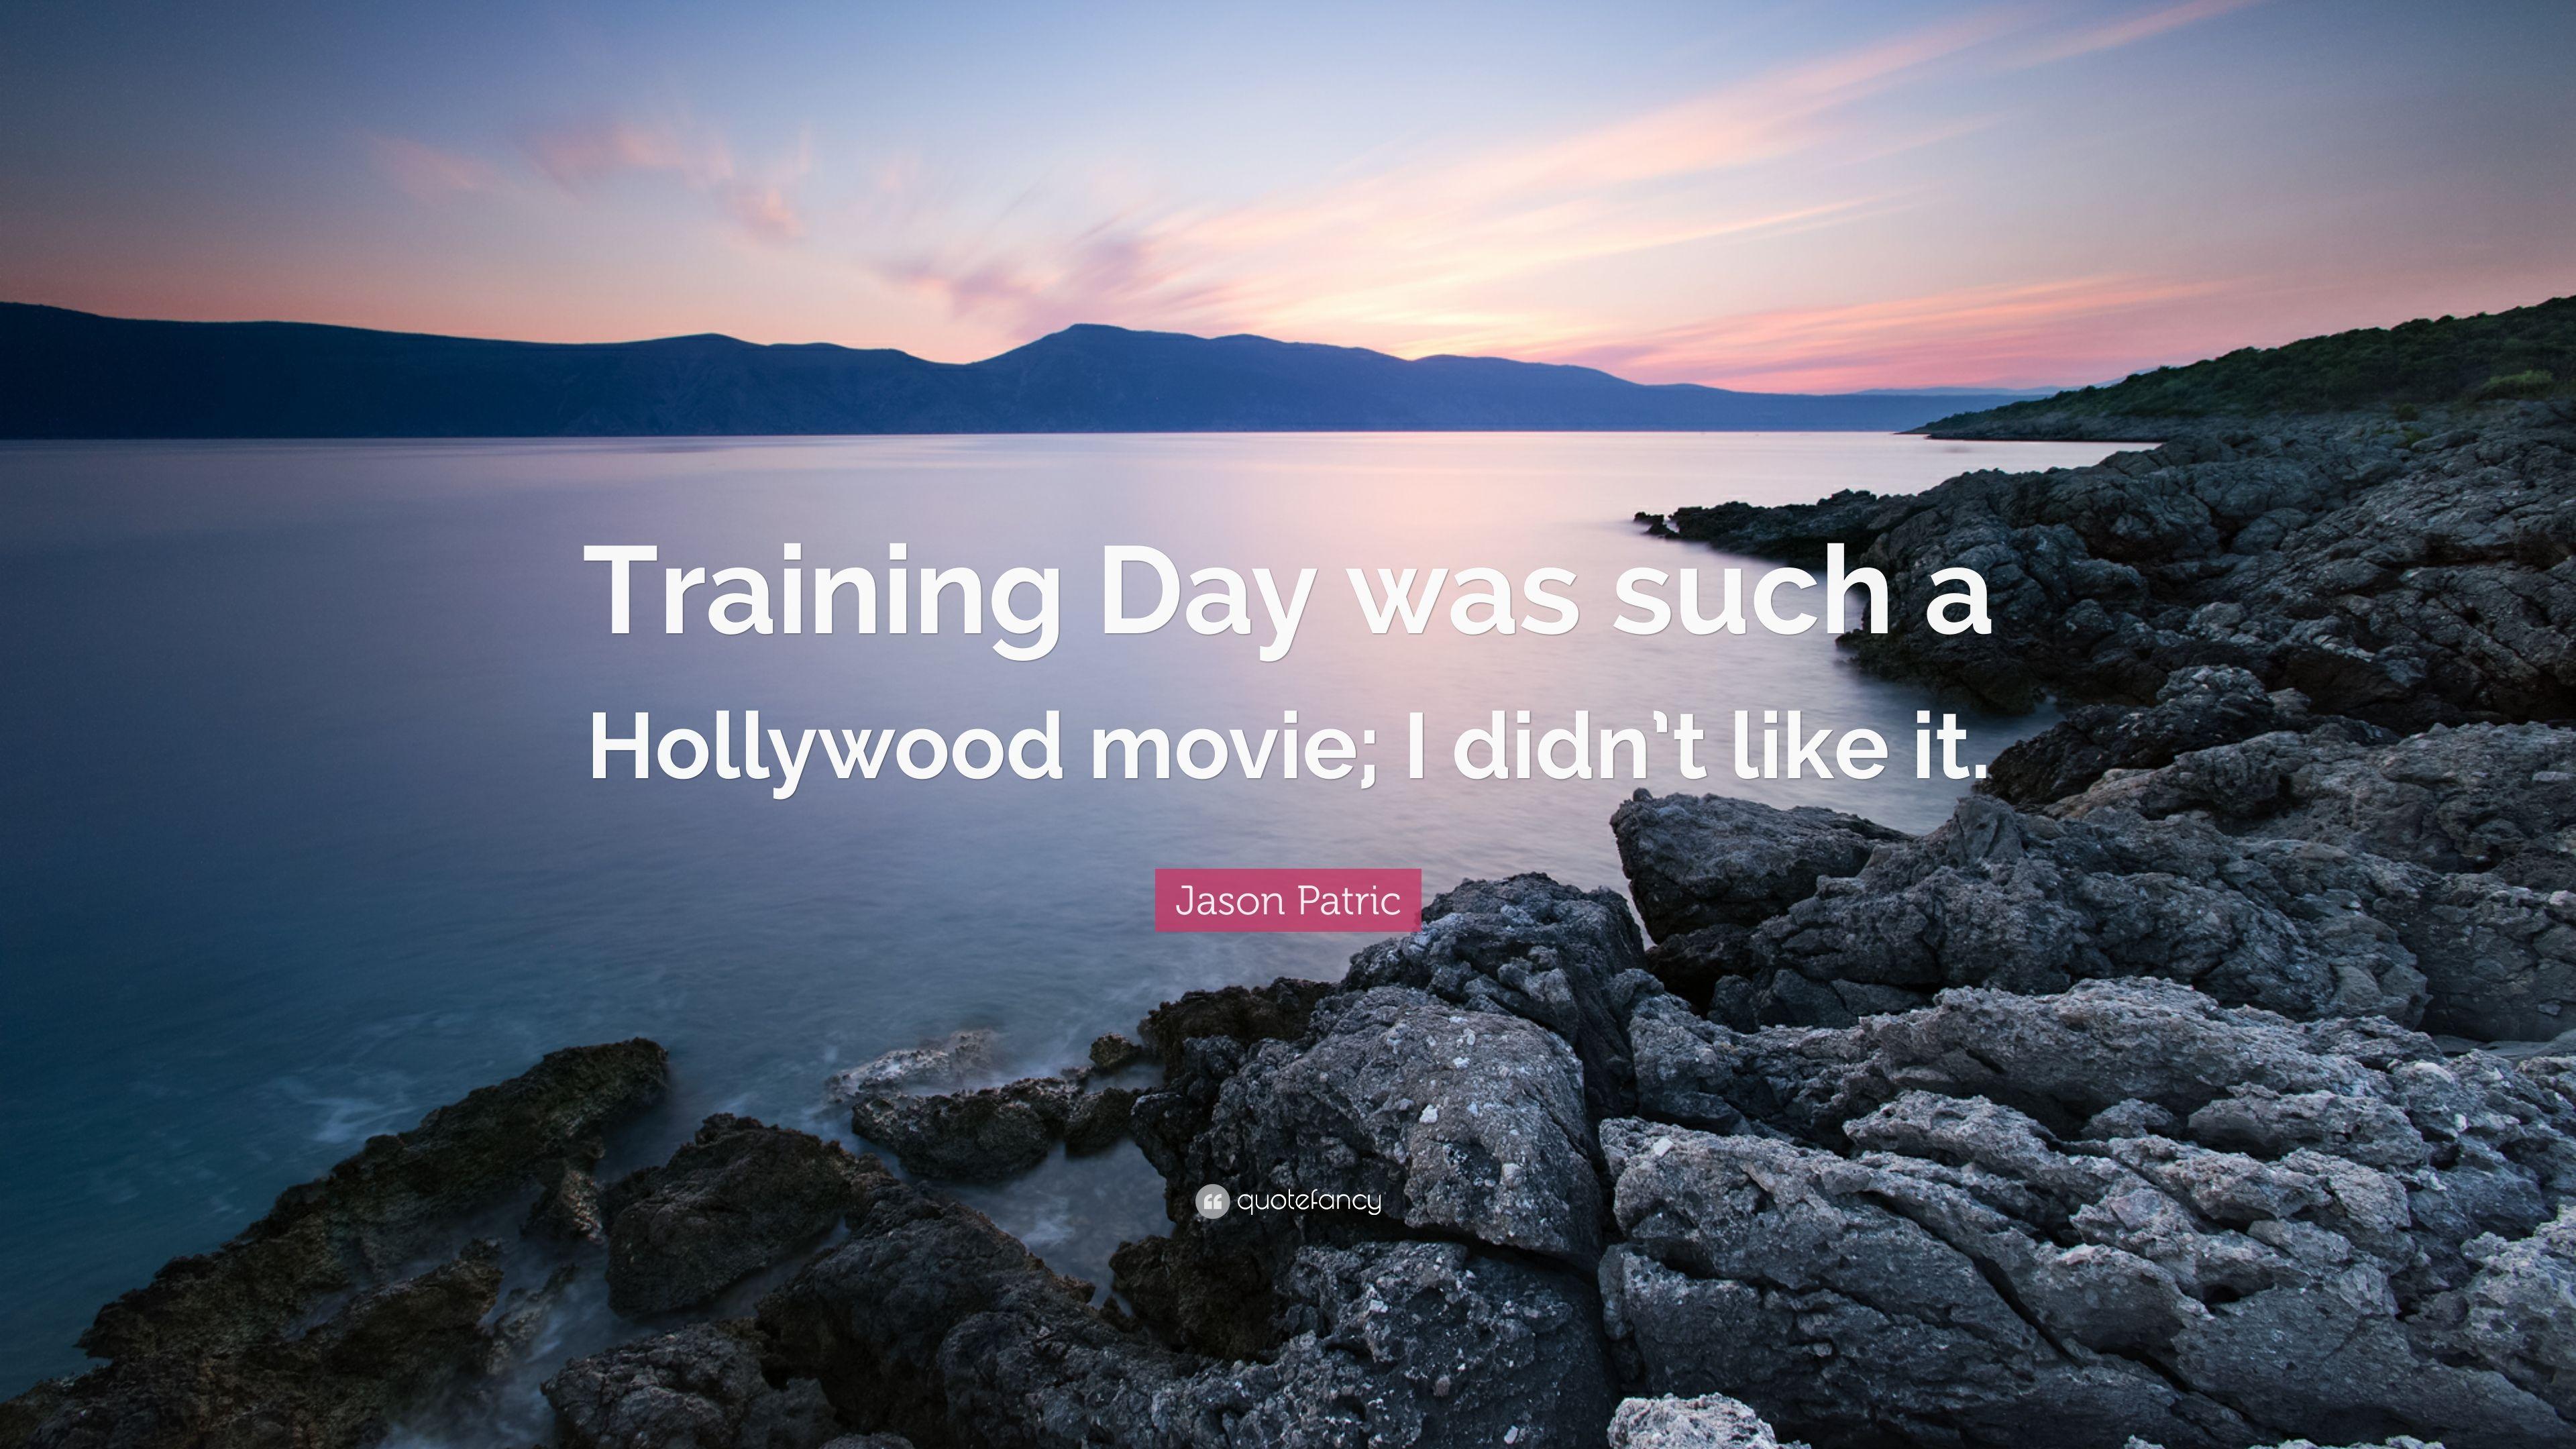 Jason Patric Quote: “Training Day was such a Hollywood movie; I didn